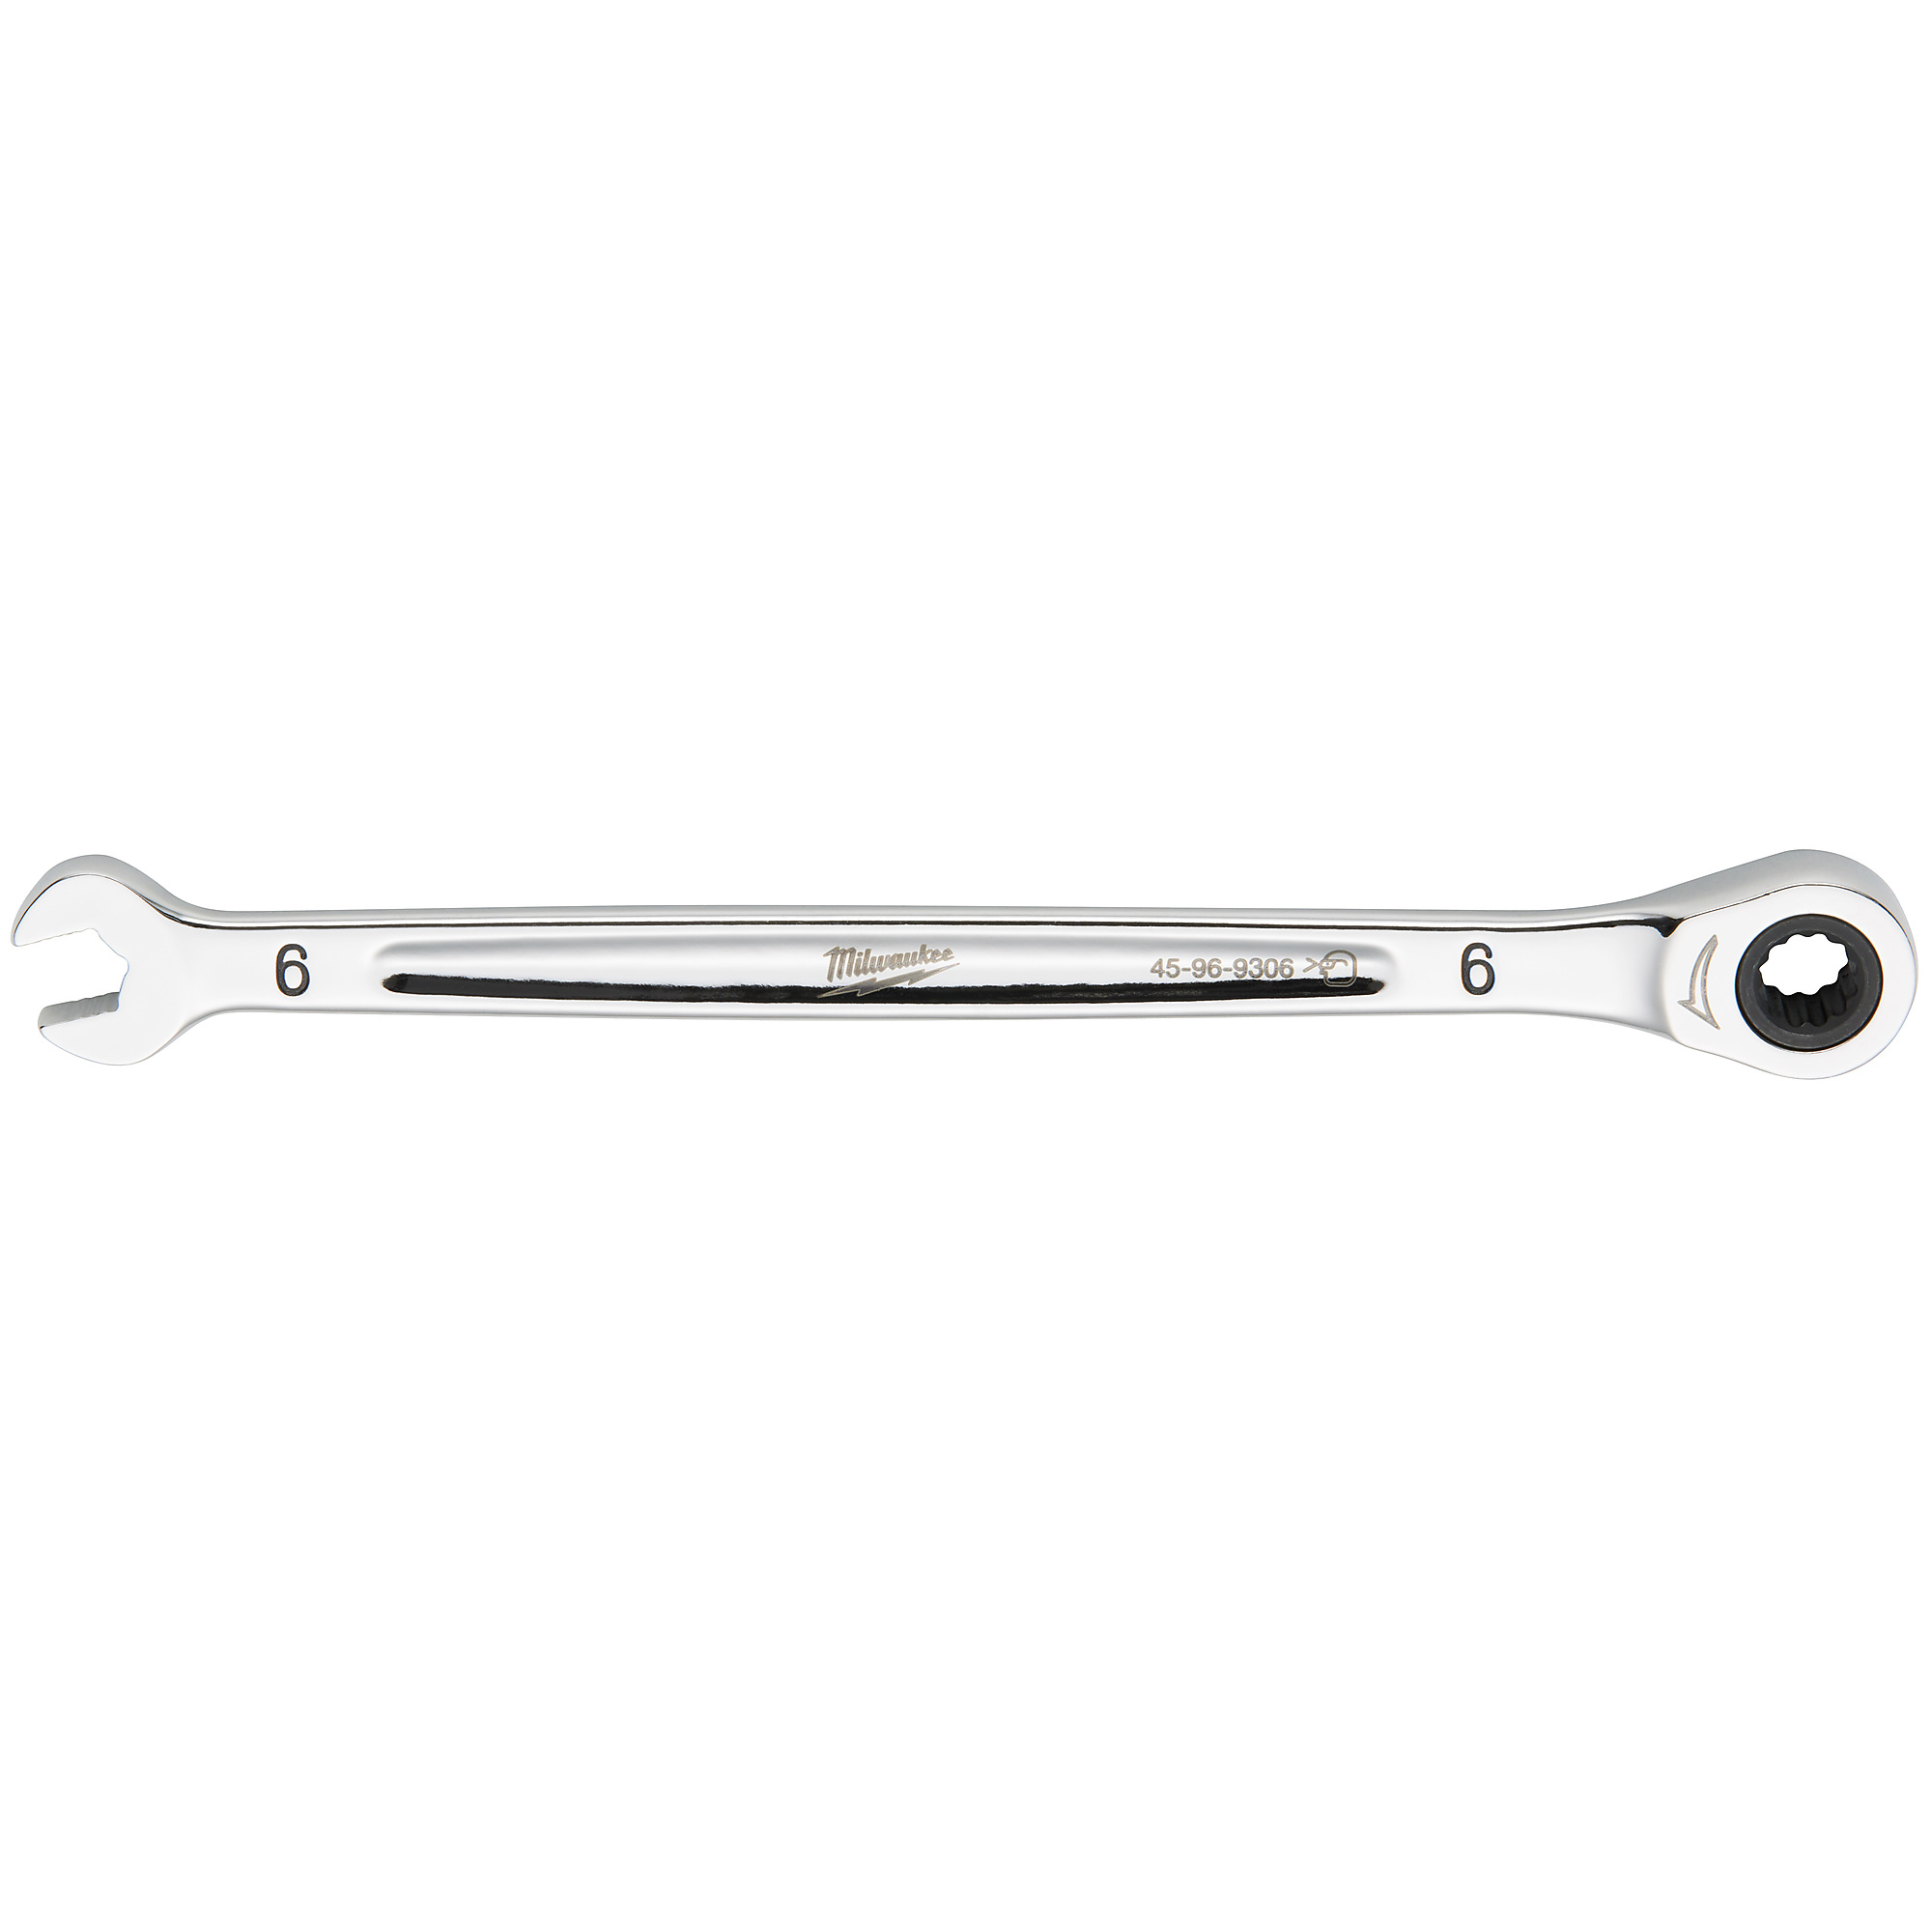 Milwaukee, 6MM RATCHETING COMBO WRENCH, Pieces (qty.) 1 Tool Length 5.04 in, Measurement Standard Metric, Model 45-96-9306